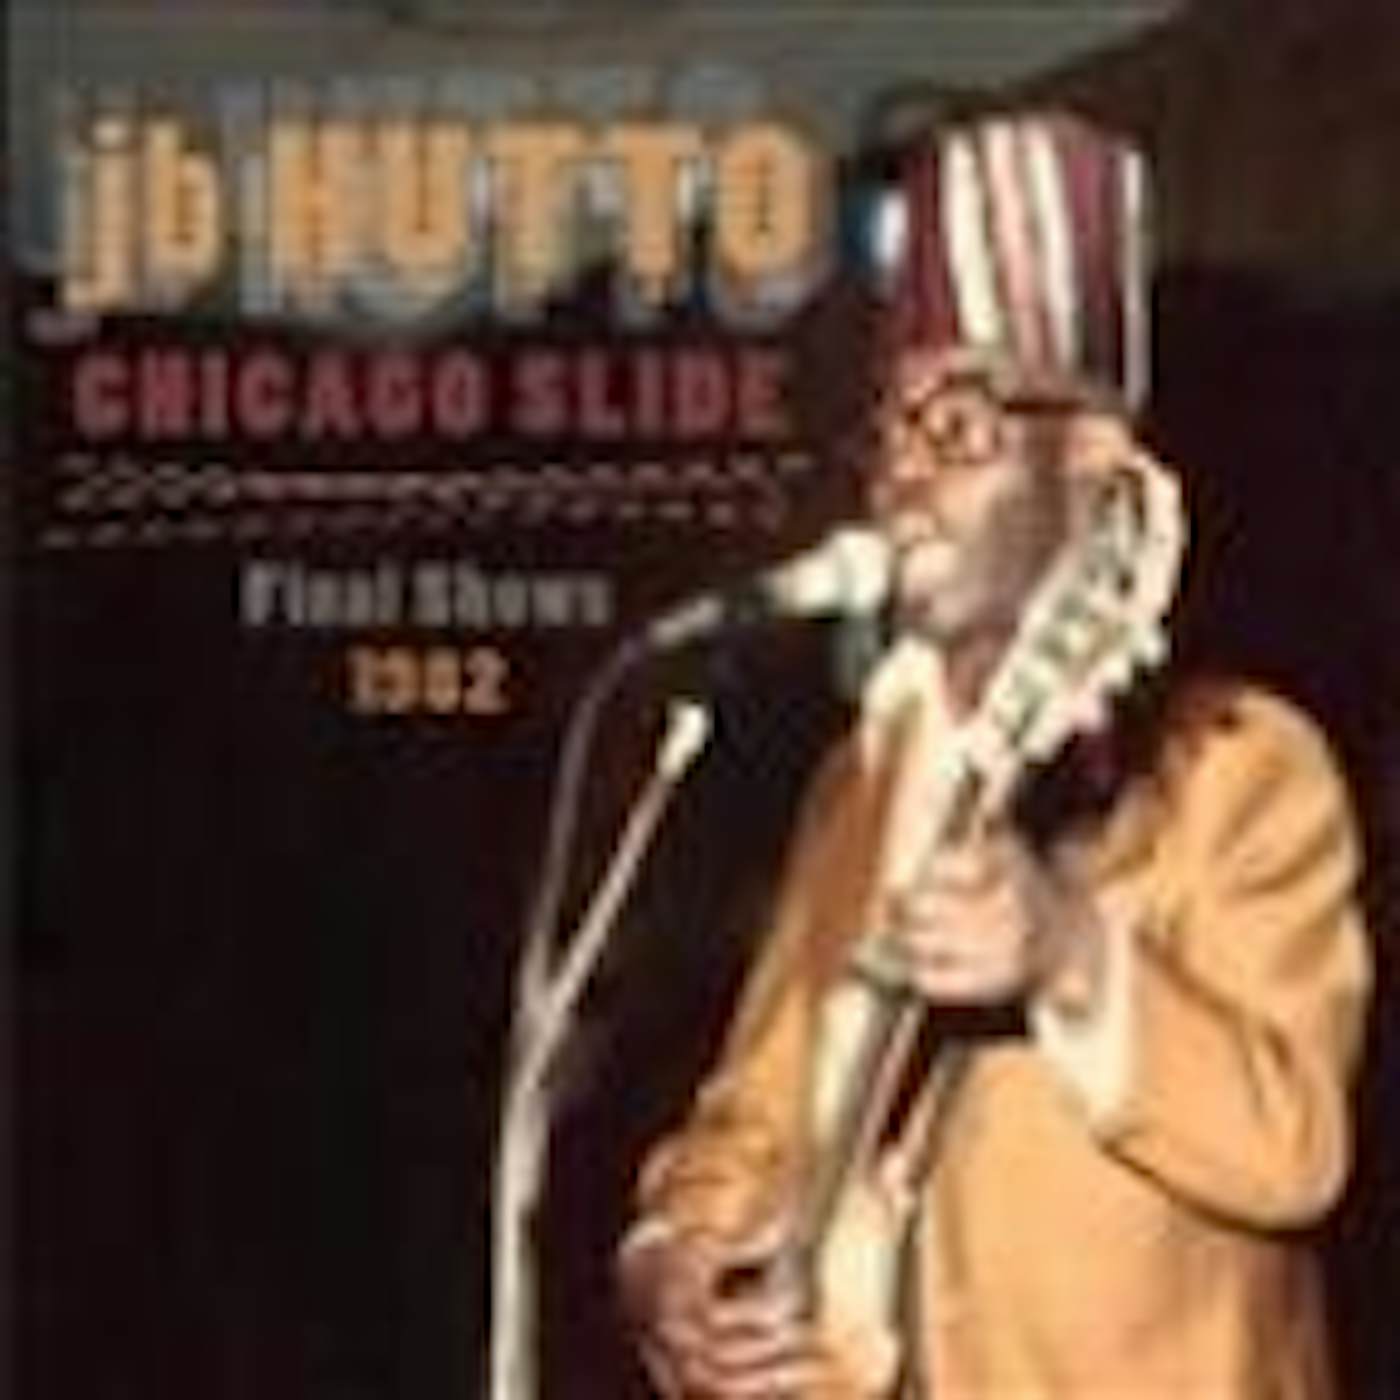 J. B. Hutto CHICAGO SLIDE THE FINAL SHOWS 1984 CD